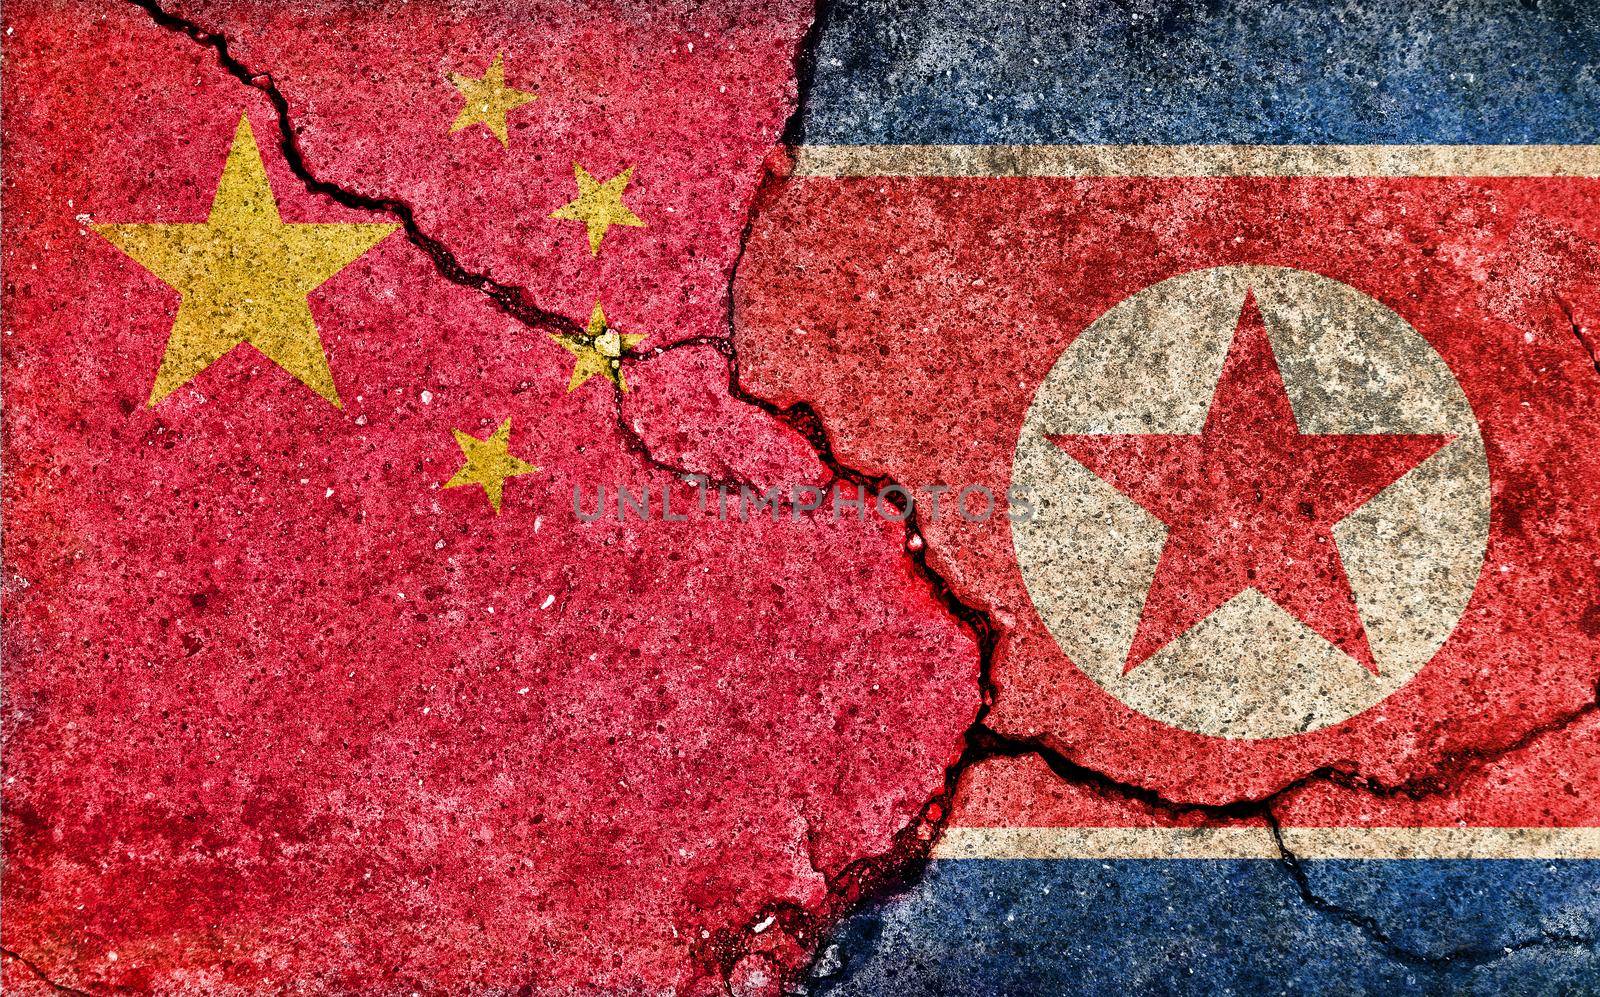 Grunge country flag illustration (cracked concrete background) / China vs North korea (Political or economic conflict) by barks